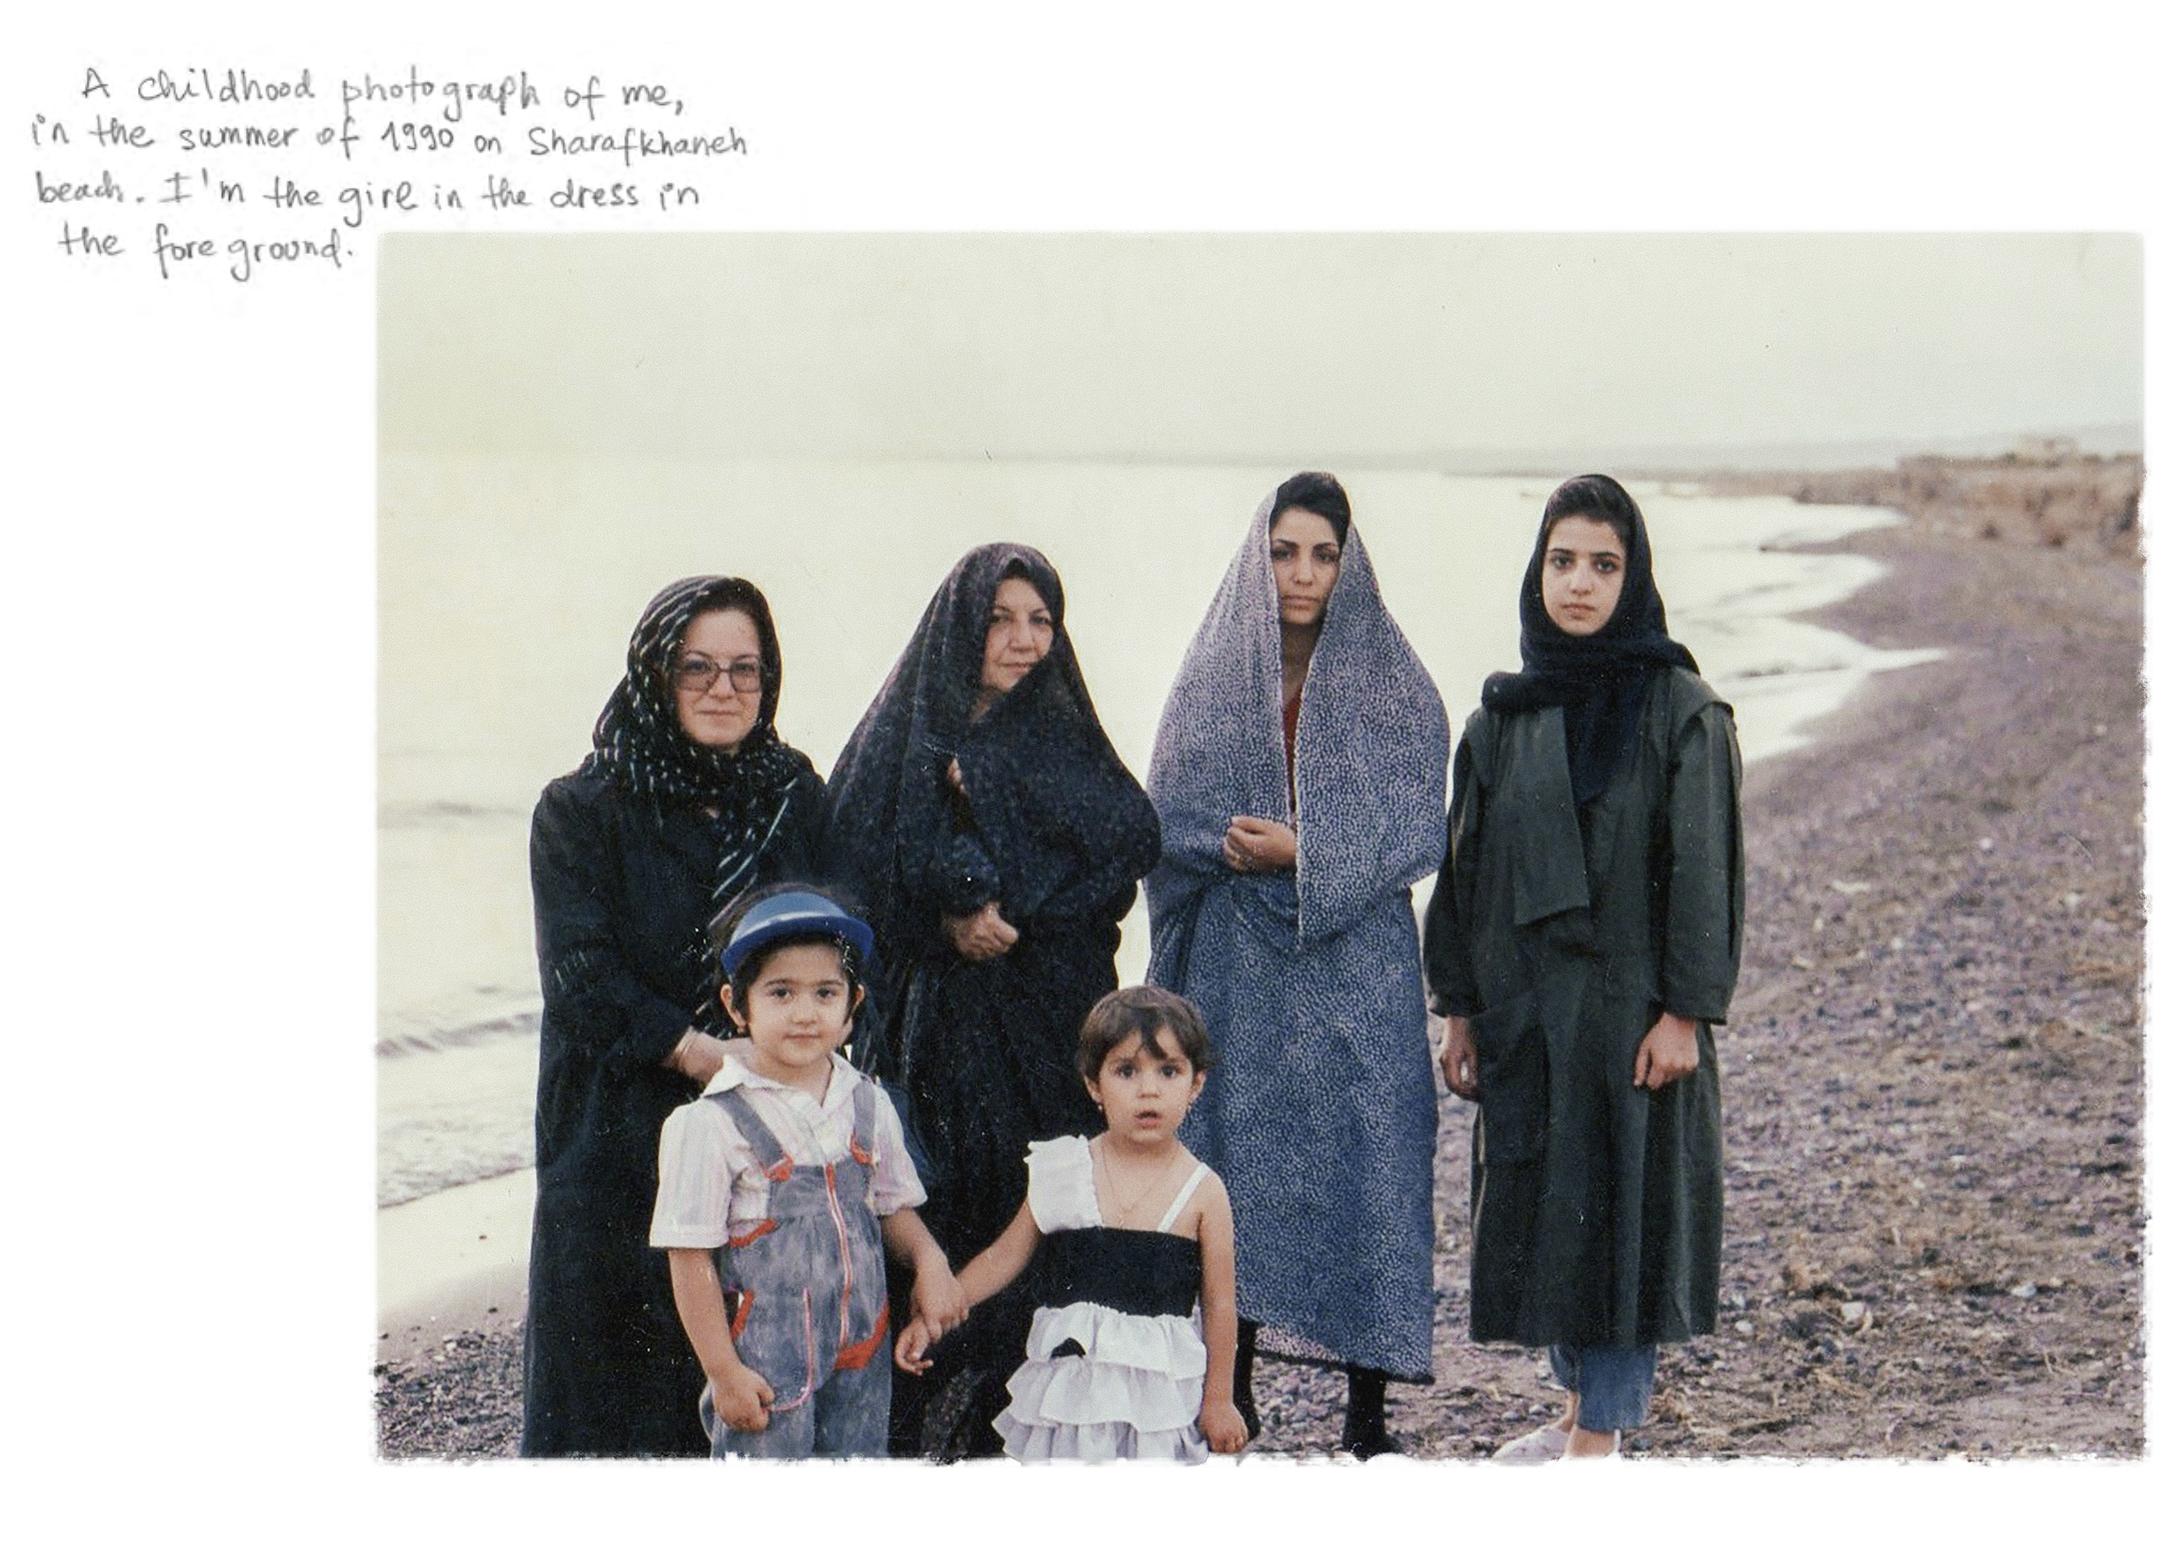 THE EYES OF EARTH (THE DEATH OF LAKE URMIA 2014-ONGOING) -   A childhood photograph of me, in the summer of 1990 on...